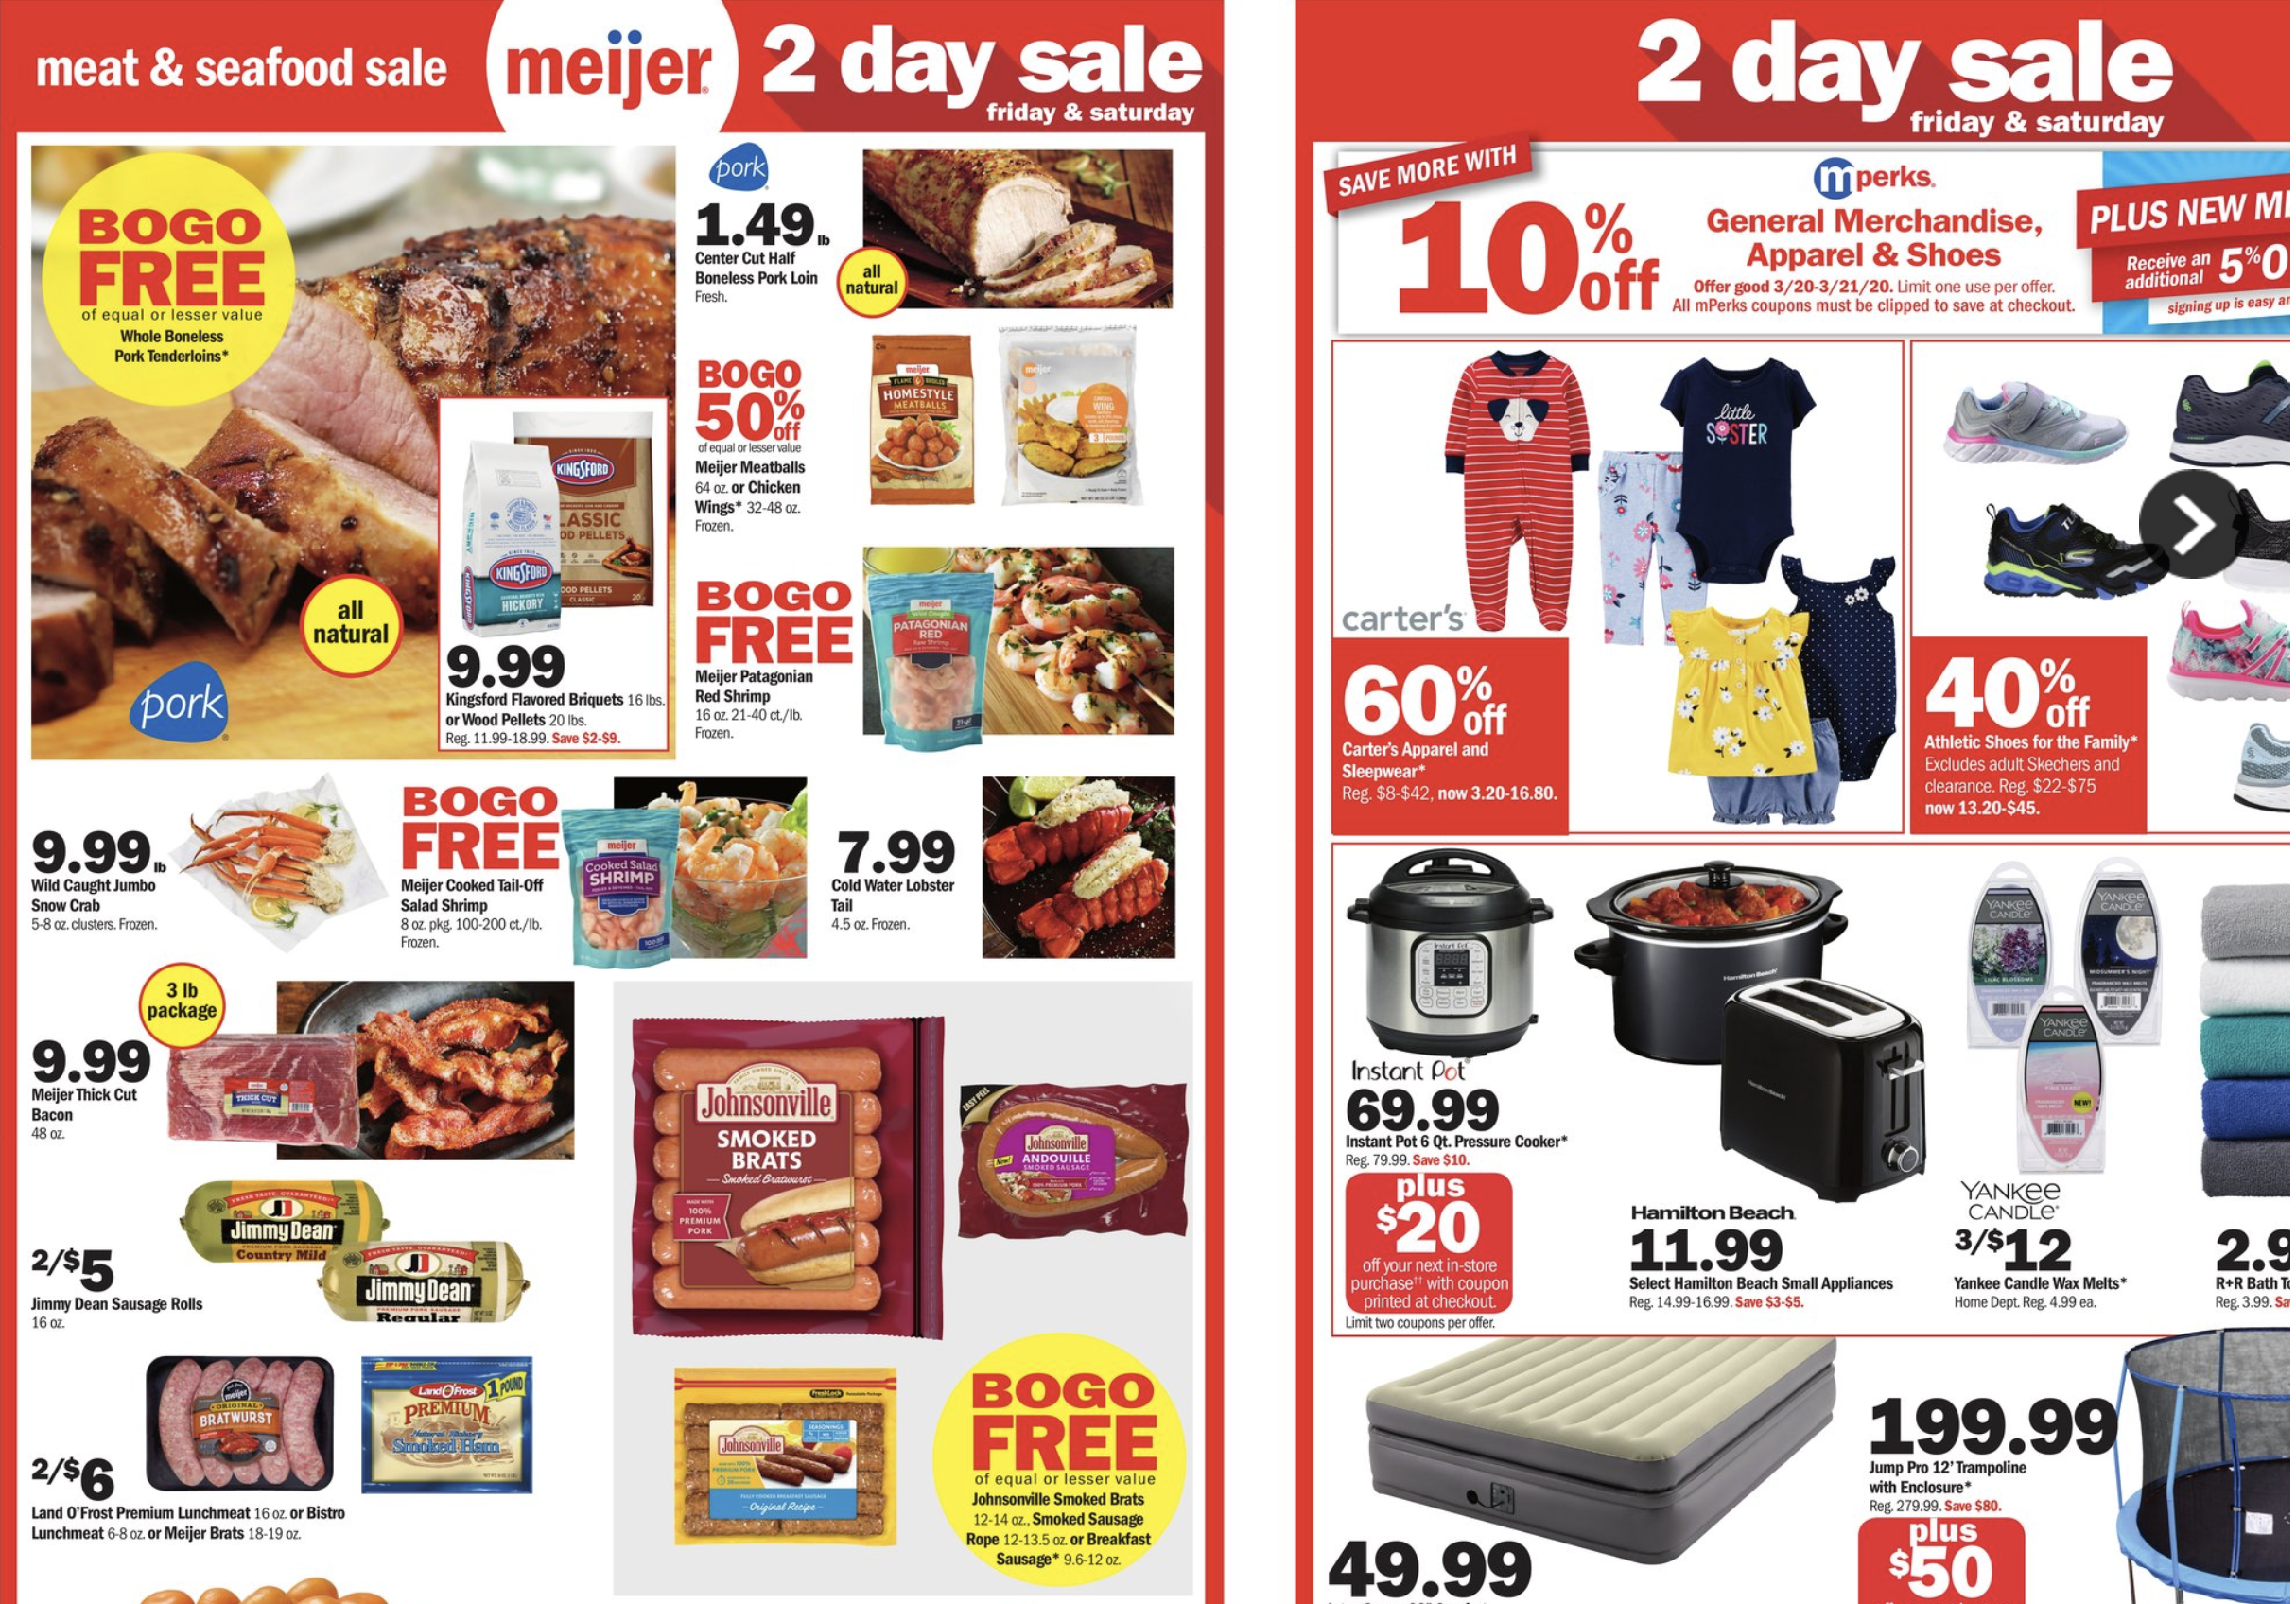 Meijer 2 Day Sale This Weekend 3/20-3/21